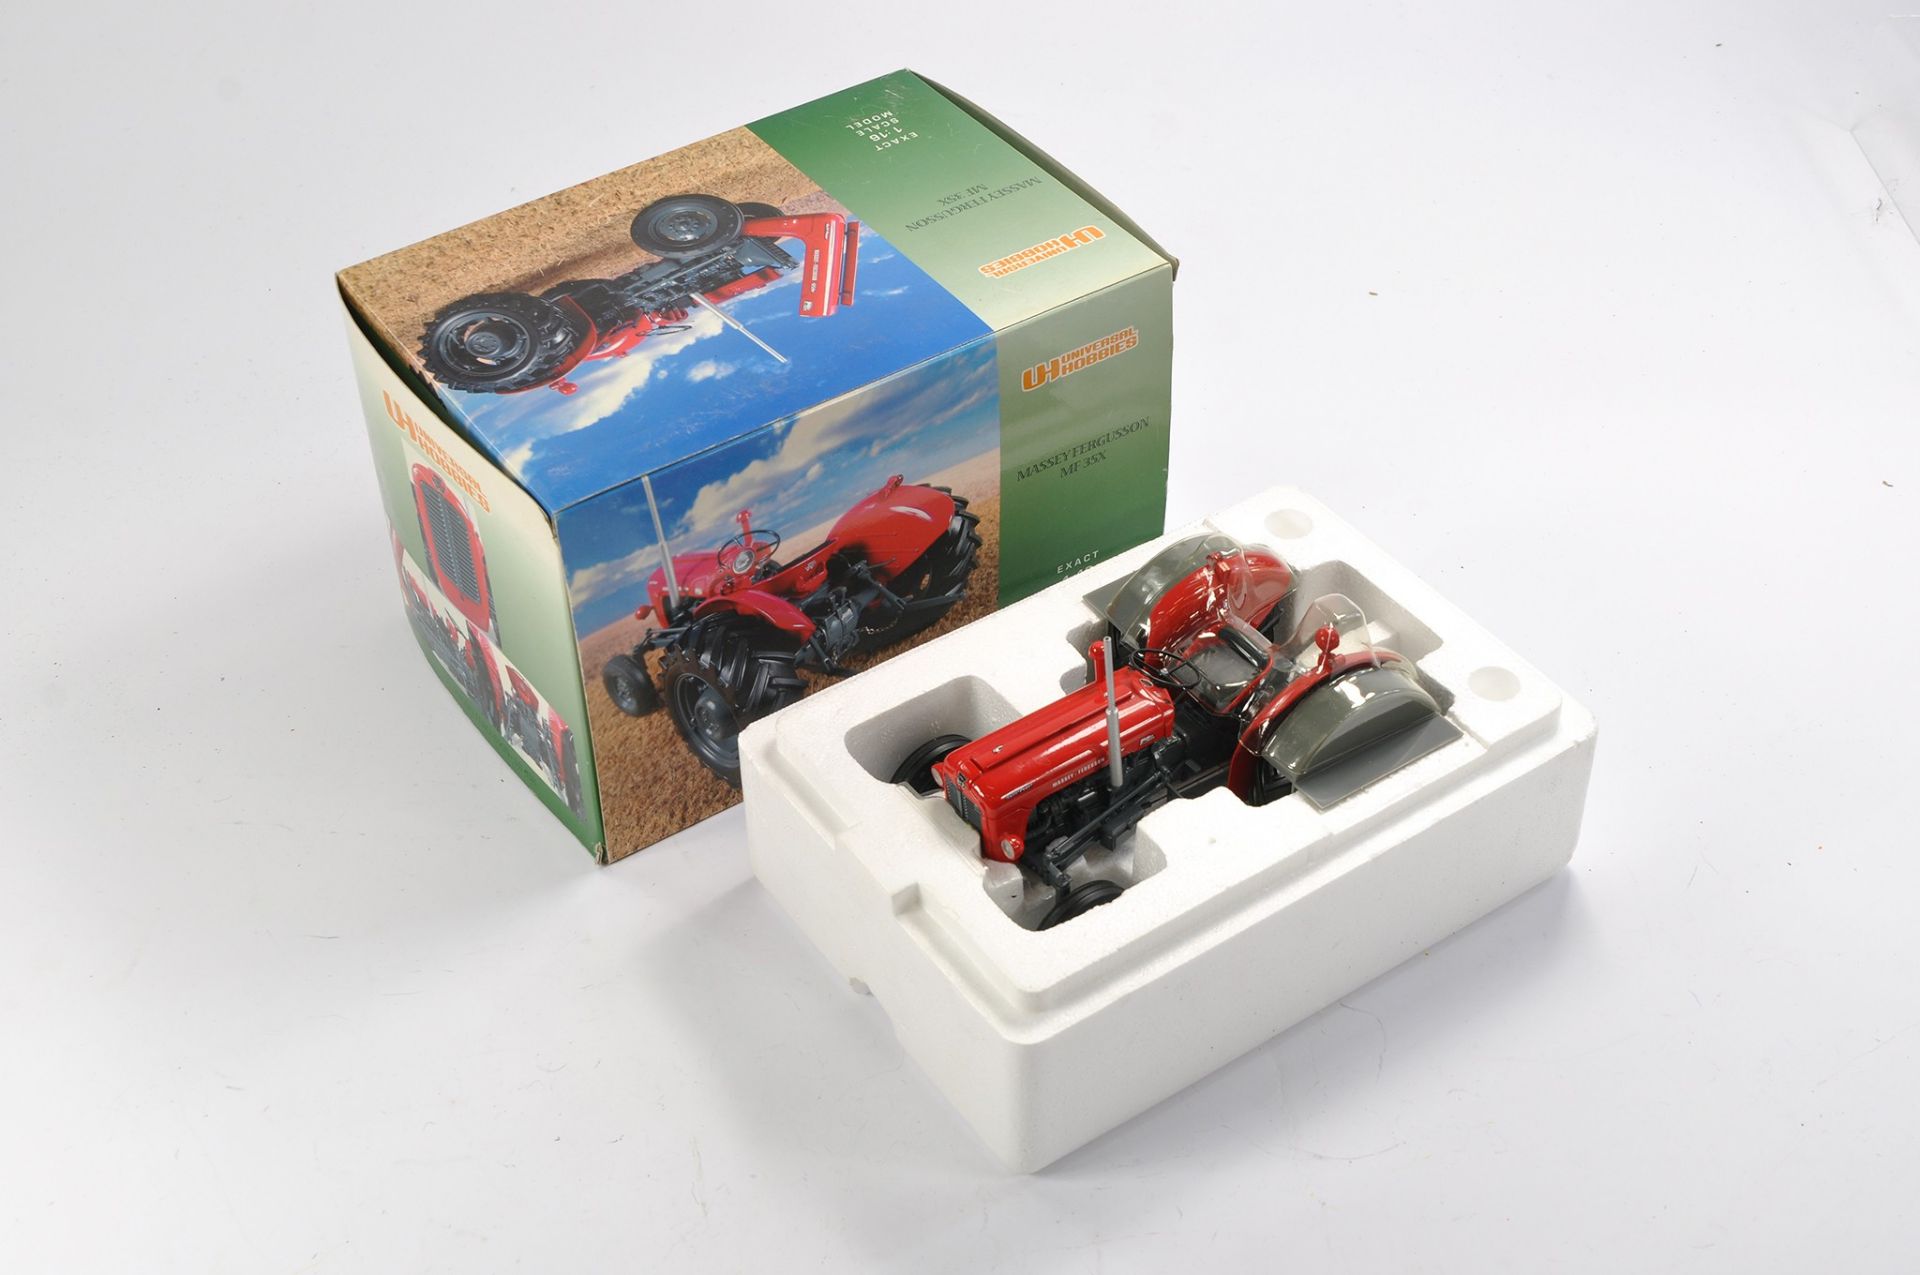 Universal Hobbies 1/16 Massey Ferguson 35X Tractor. Looks to be complete without obvious sign of